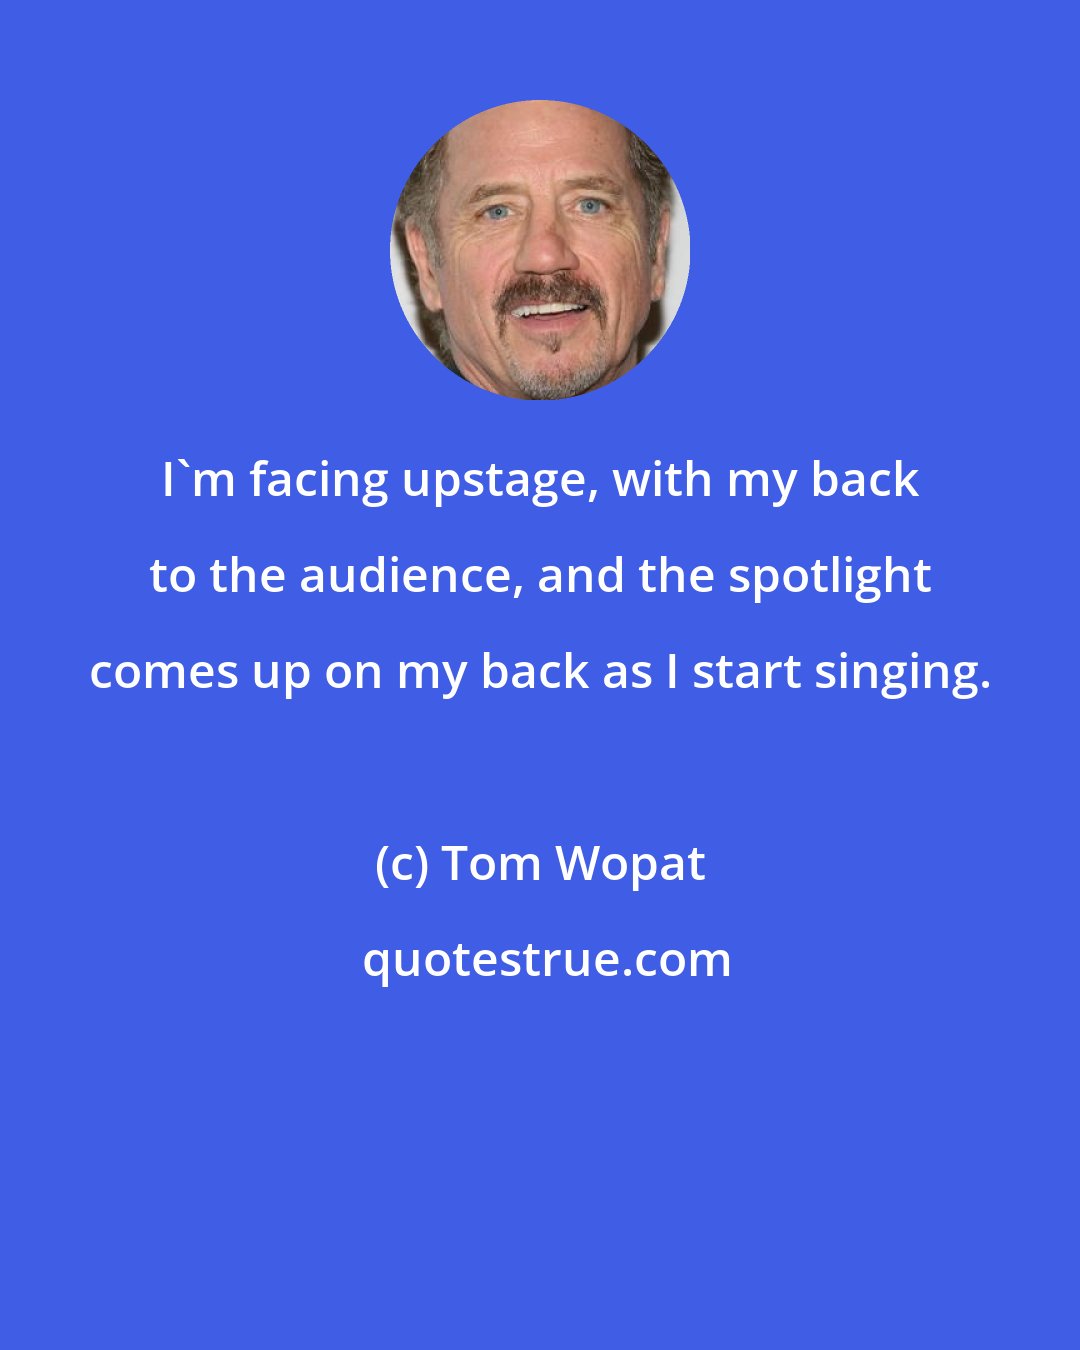 Tom Wopat: I'm facing upstage, with my back to the audience, and the spotlight comes up on my back as I start singing.